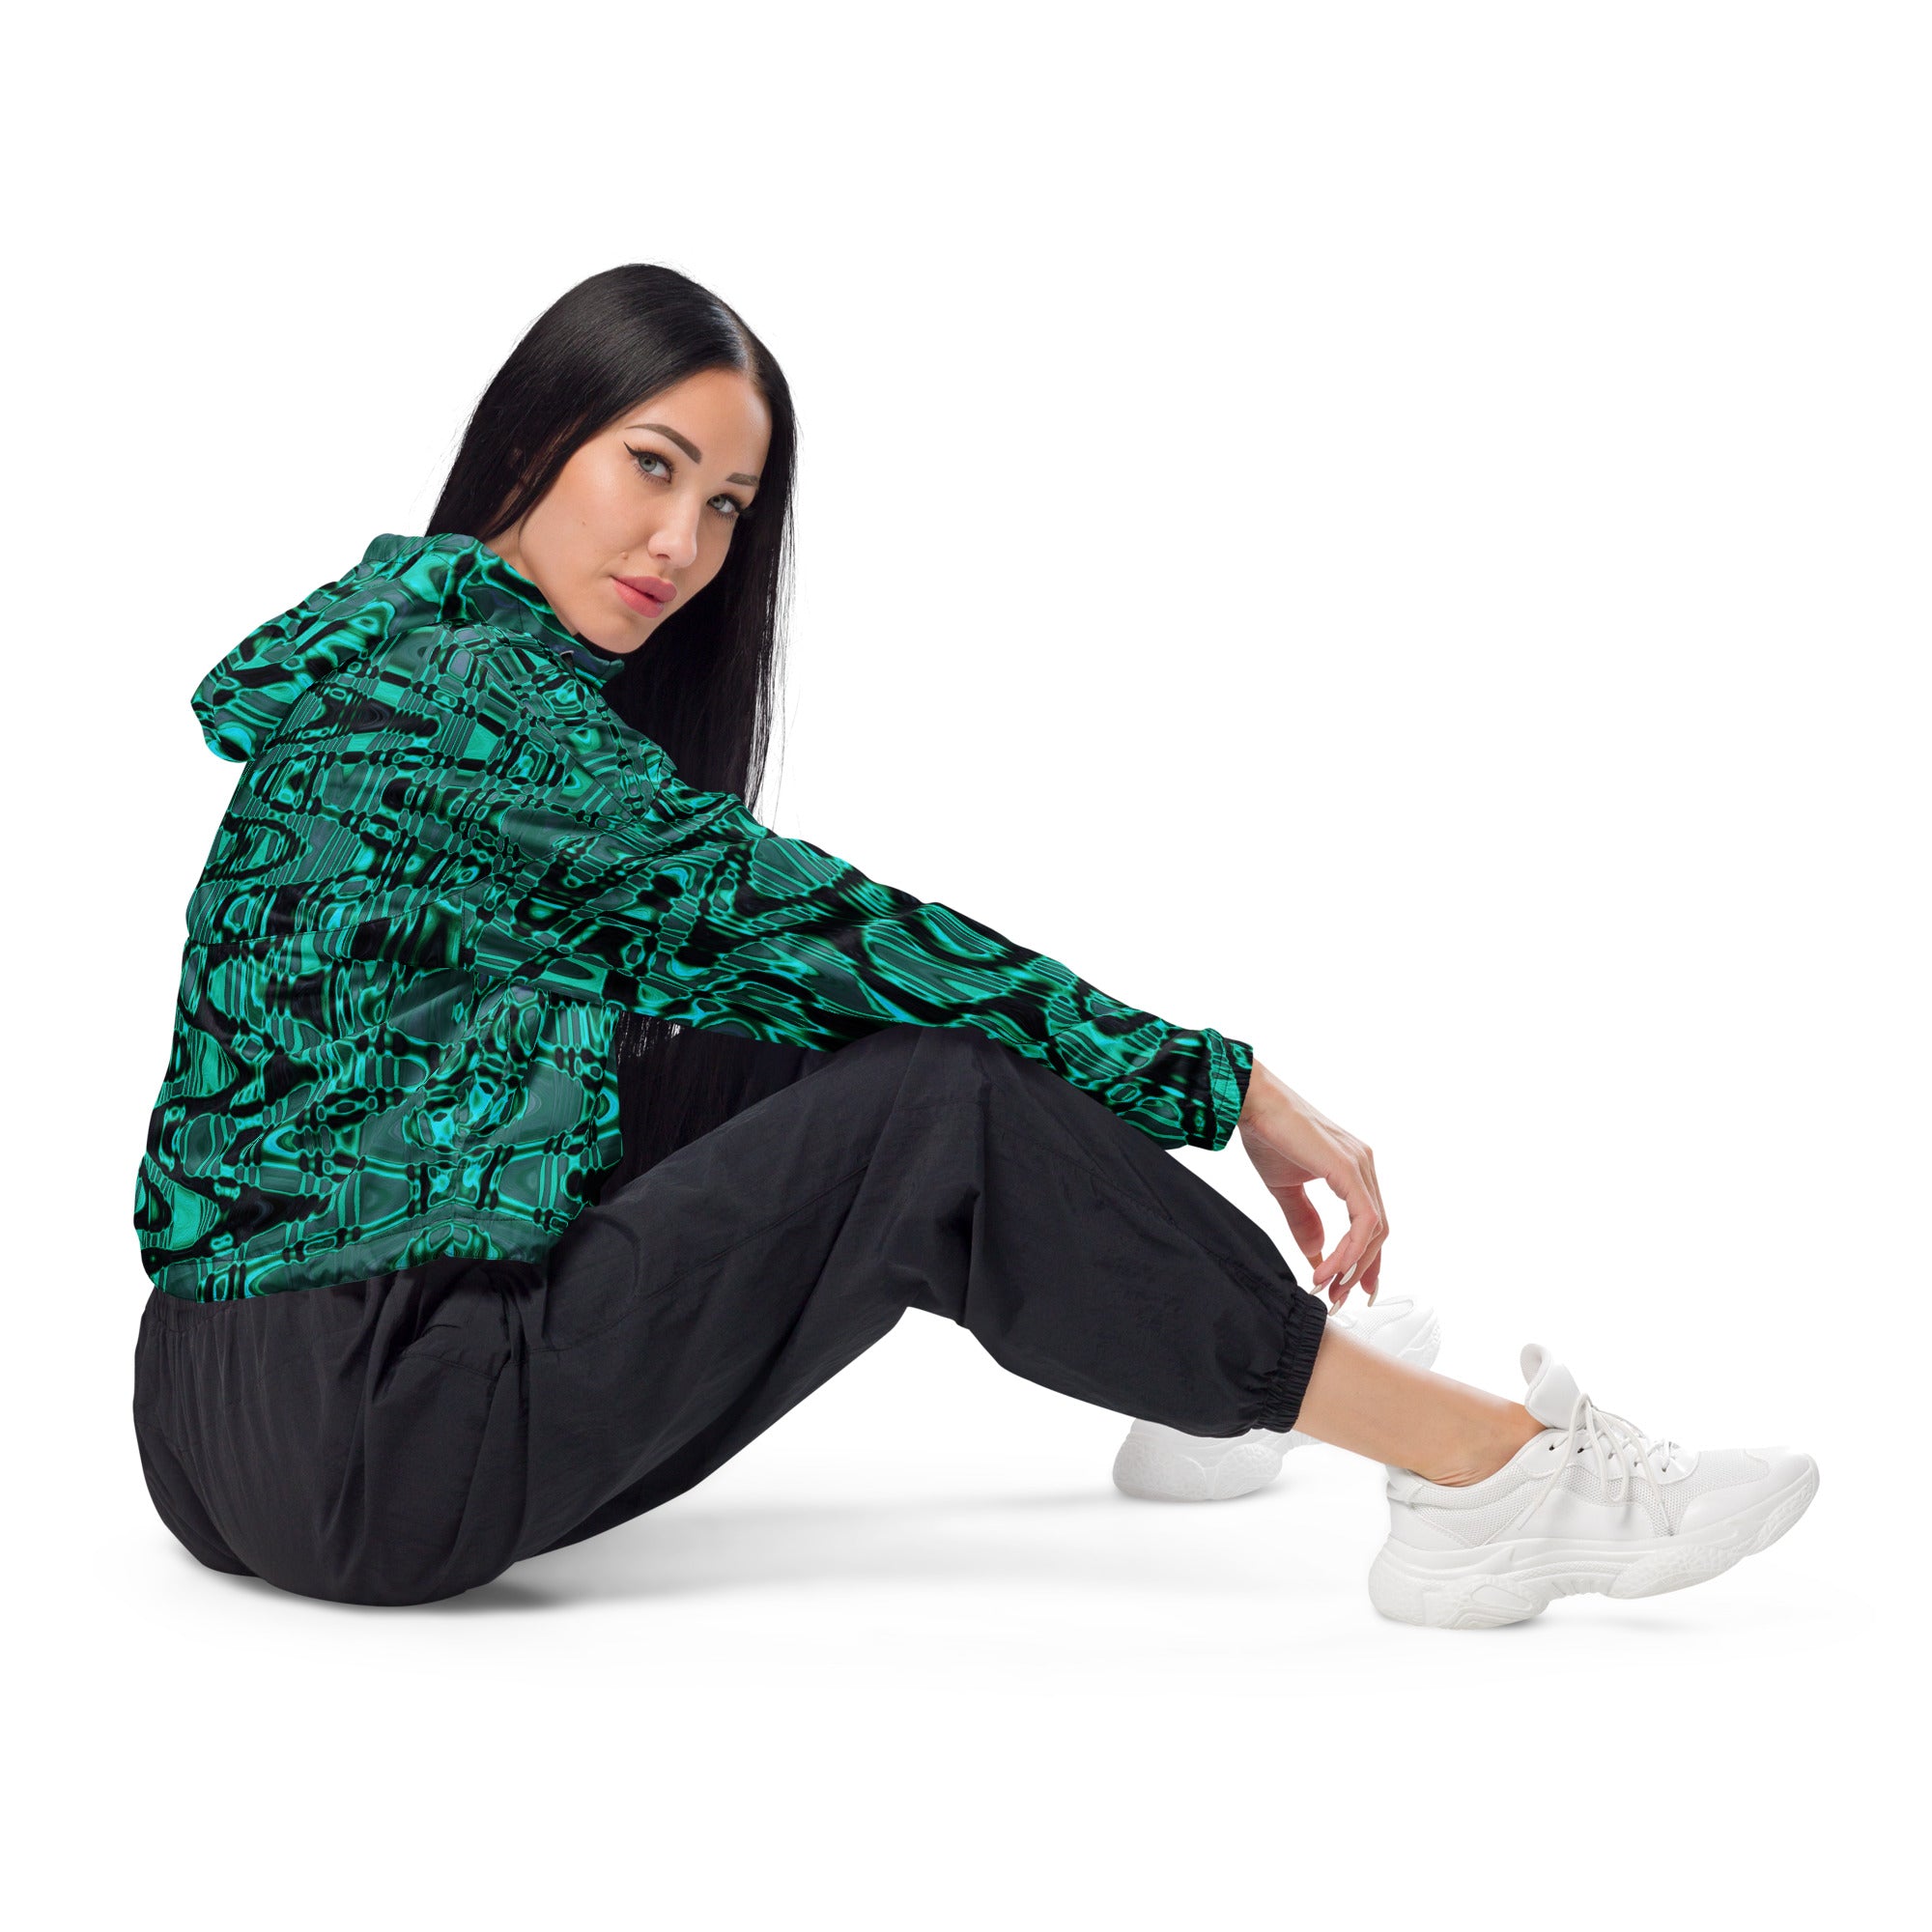 Women’s Cropped Windbreaker | Cool Black and Green Abstract Tie Dye Retro Waves